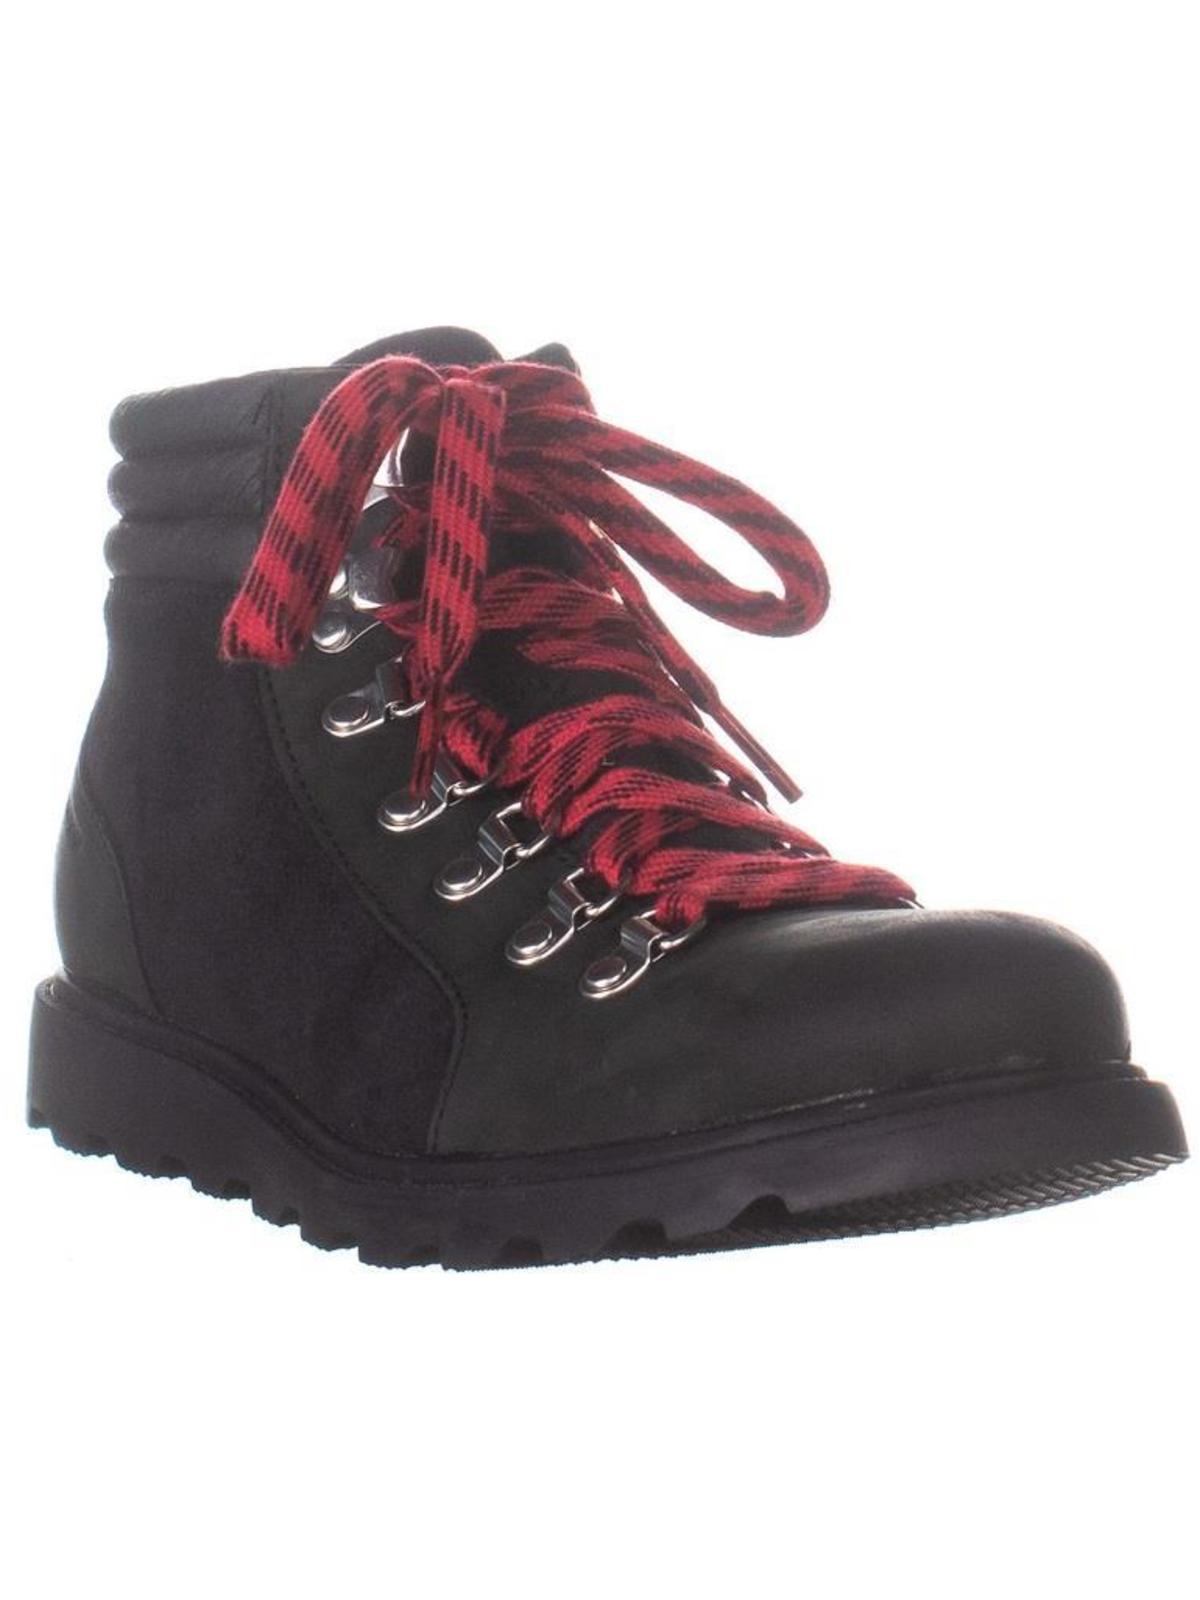 sorel women's ainsley round toe leather hiking boots